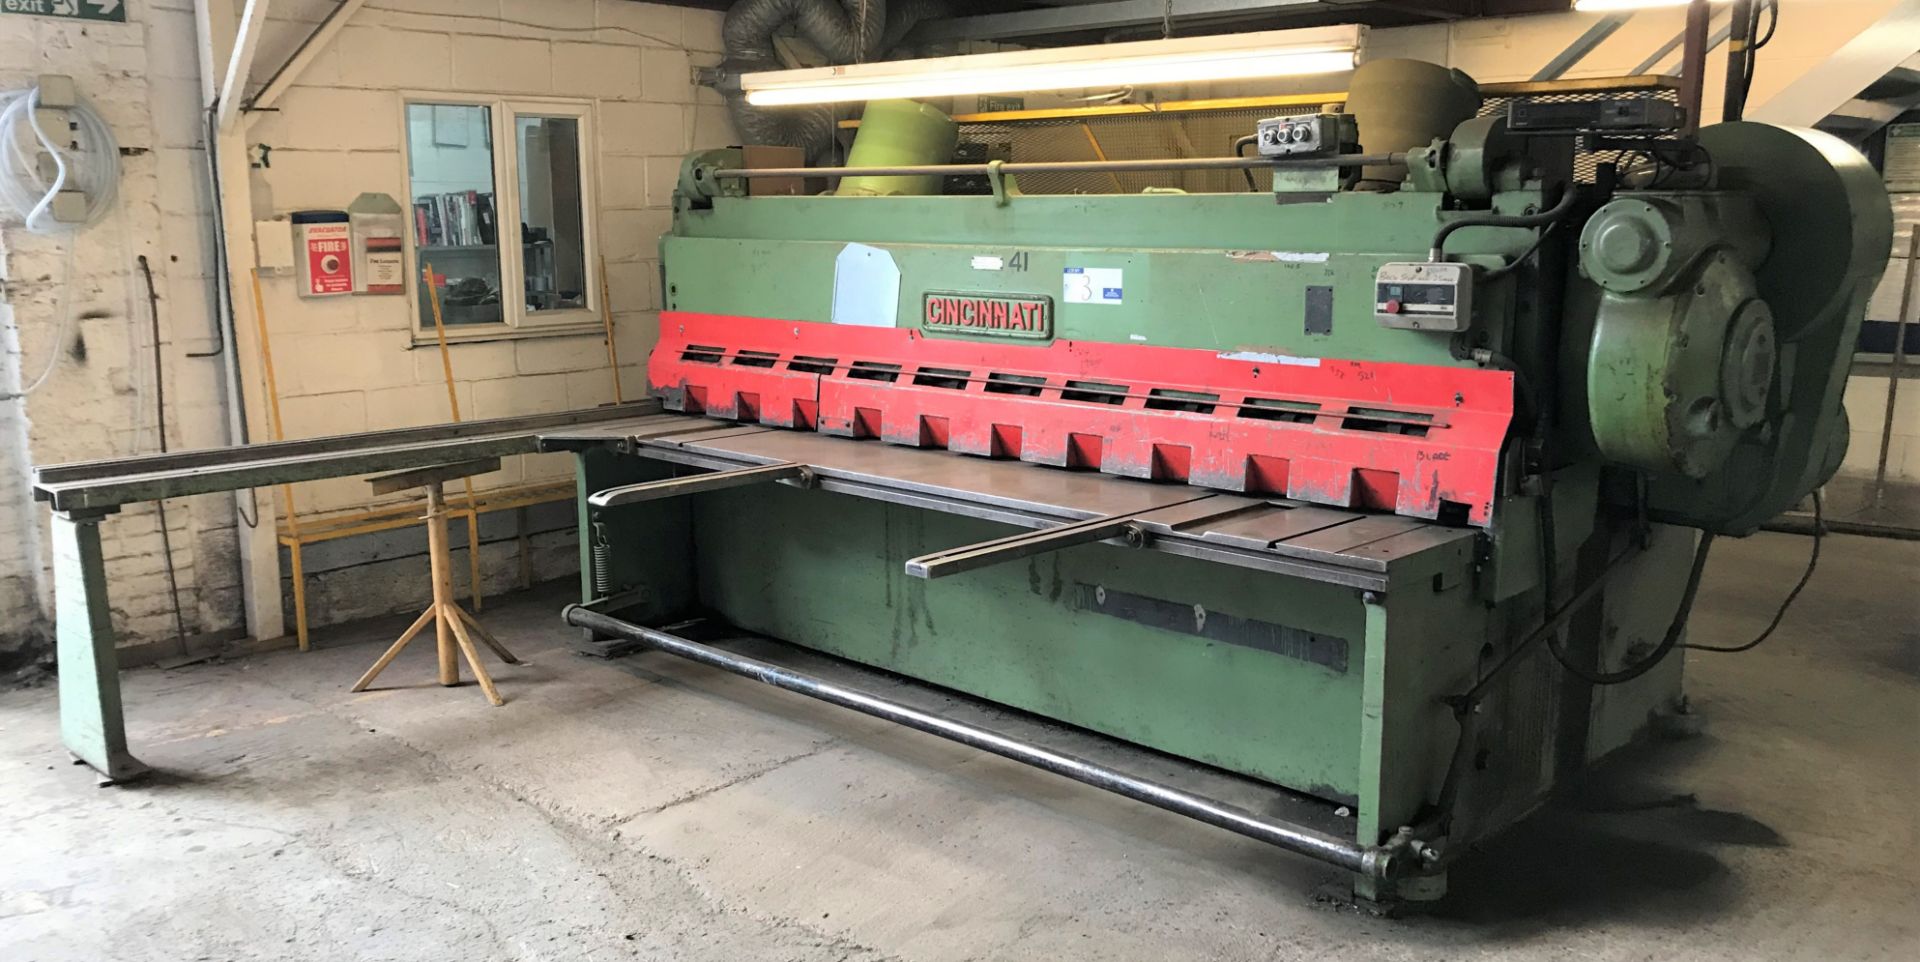 A Cincinnati Series 2510 Mechanical Guillotine No. 10938, 10ft w, 3/8in MS capacity, 3 phase with